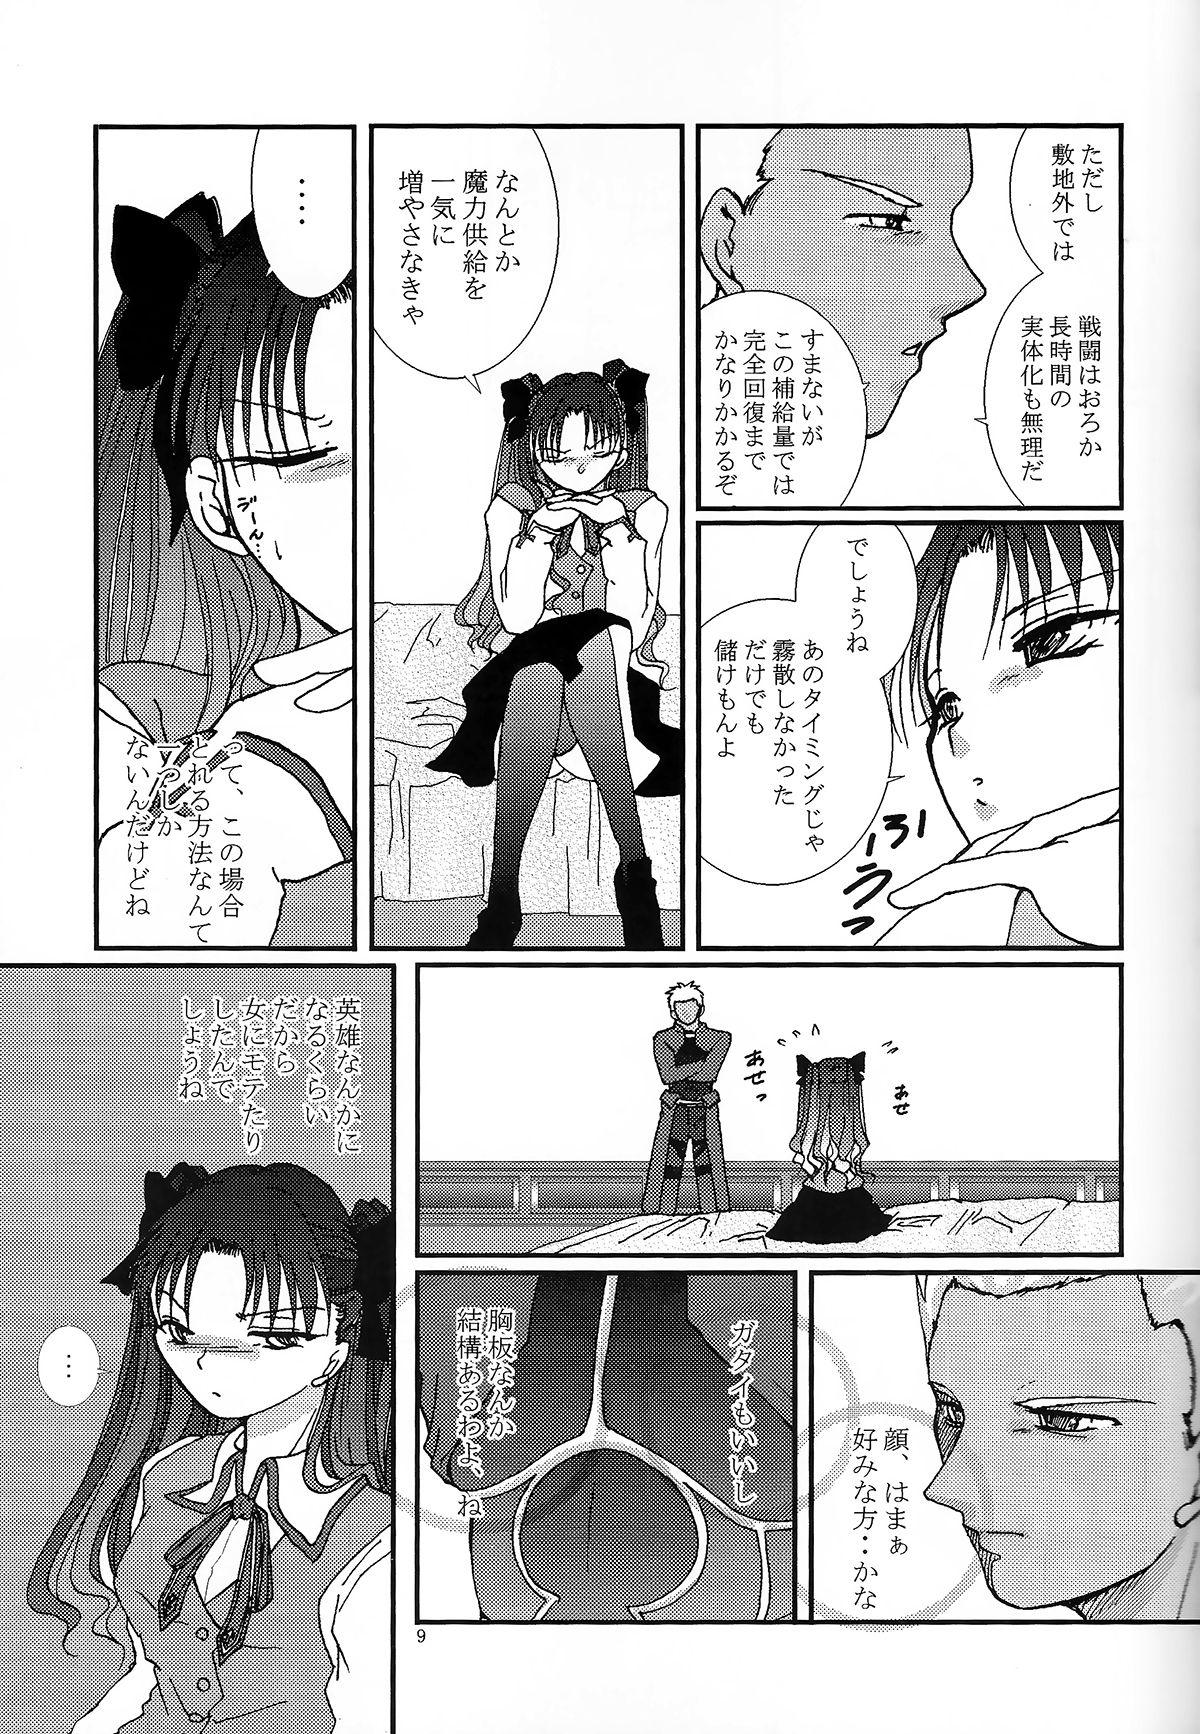 Tgirl Question-7 - Fate stay night College - Page 7